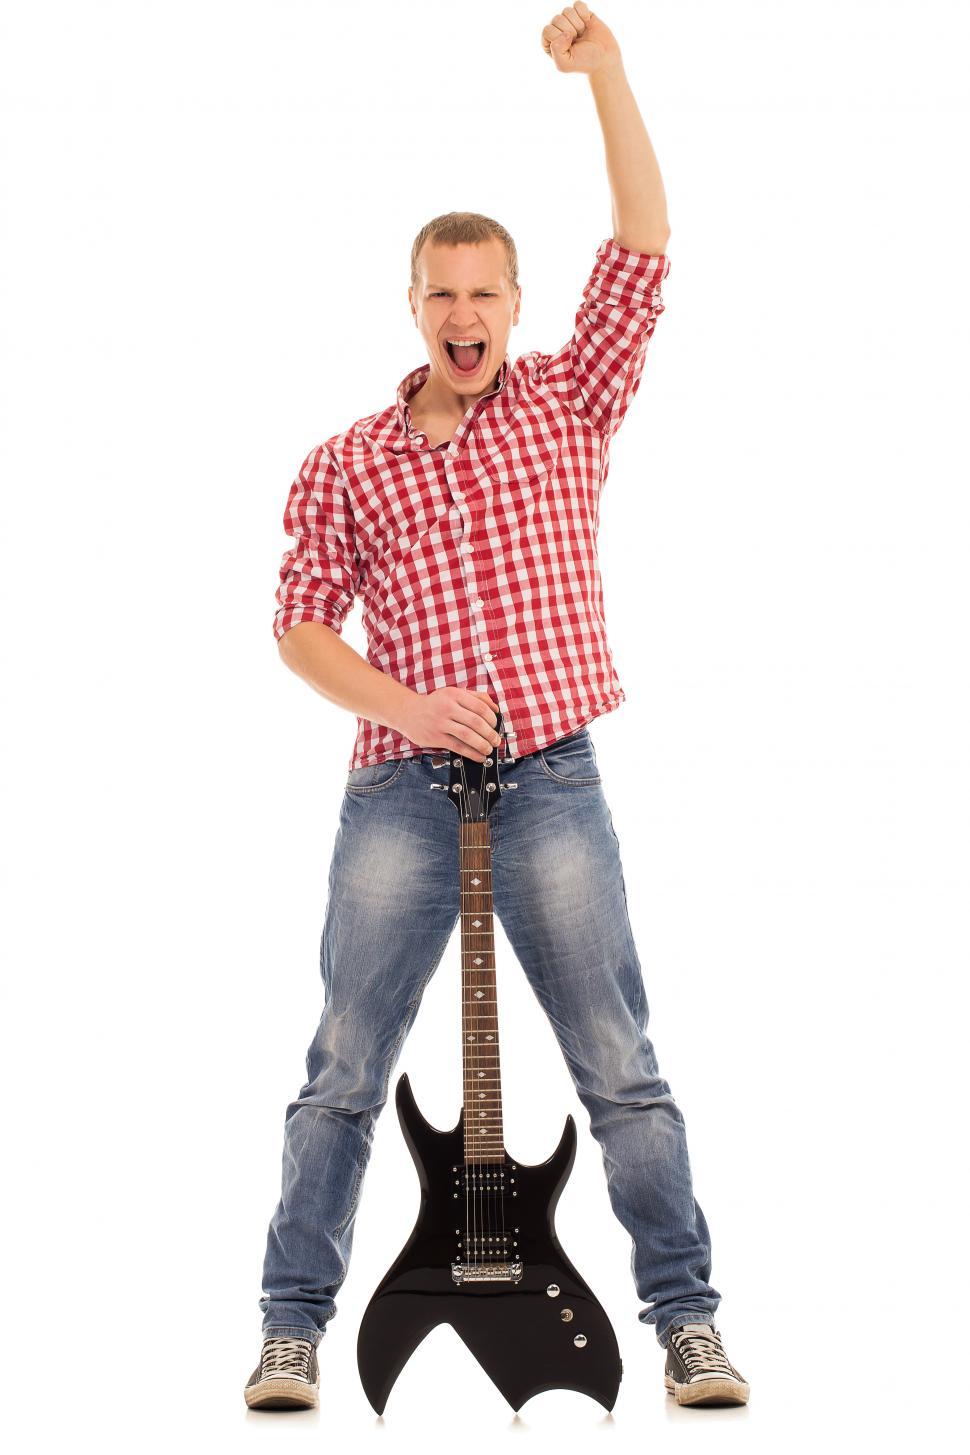 Free Image of Young rock musician with a guitar 